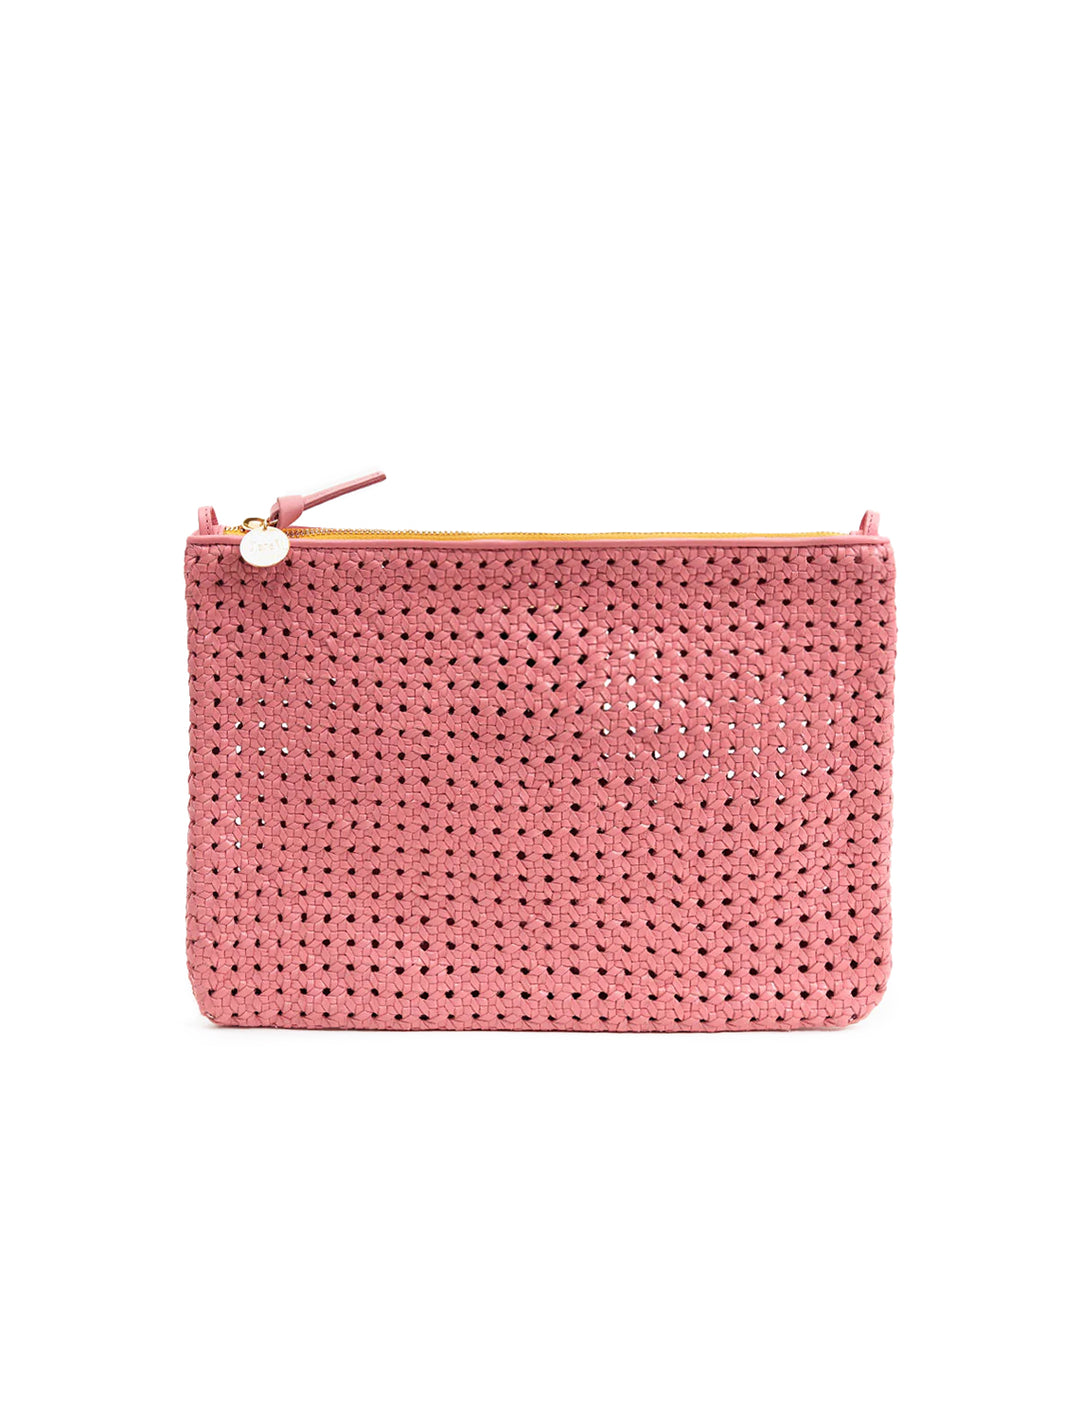 Front view of Clare V.'s flat clutch with tabs in petal rattan.